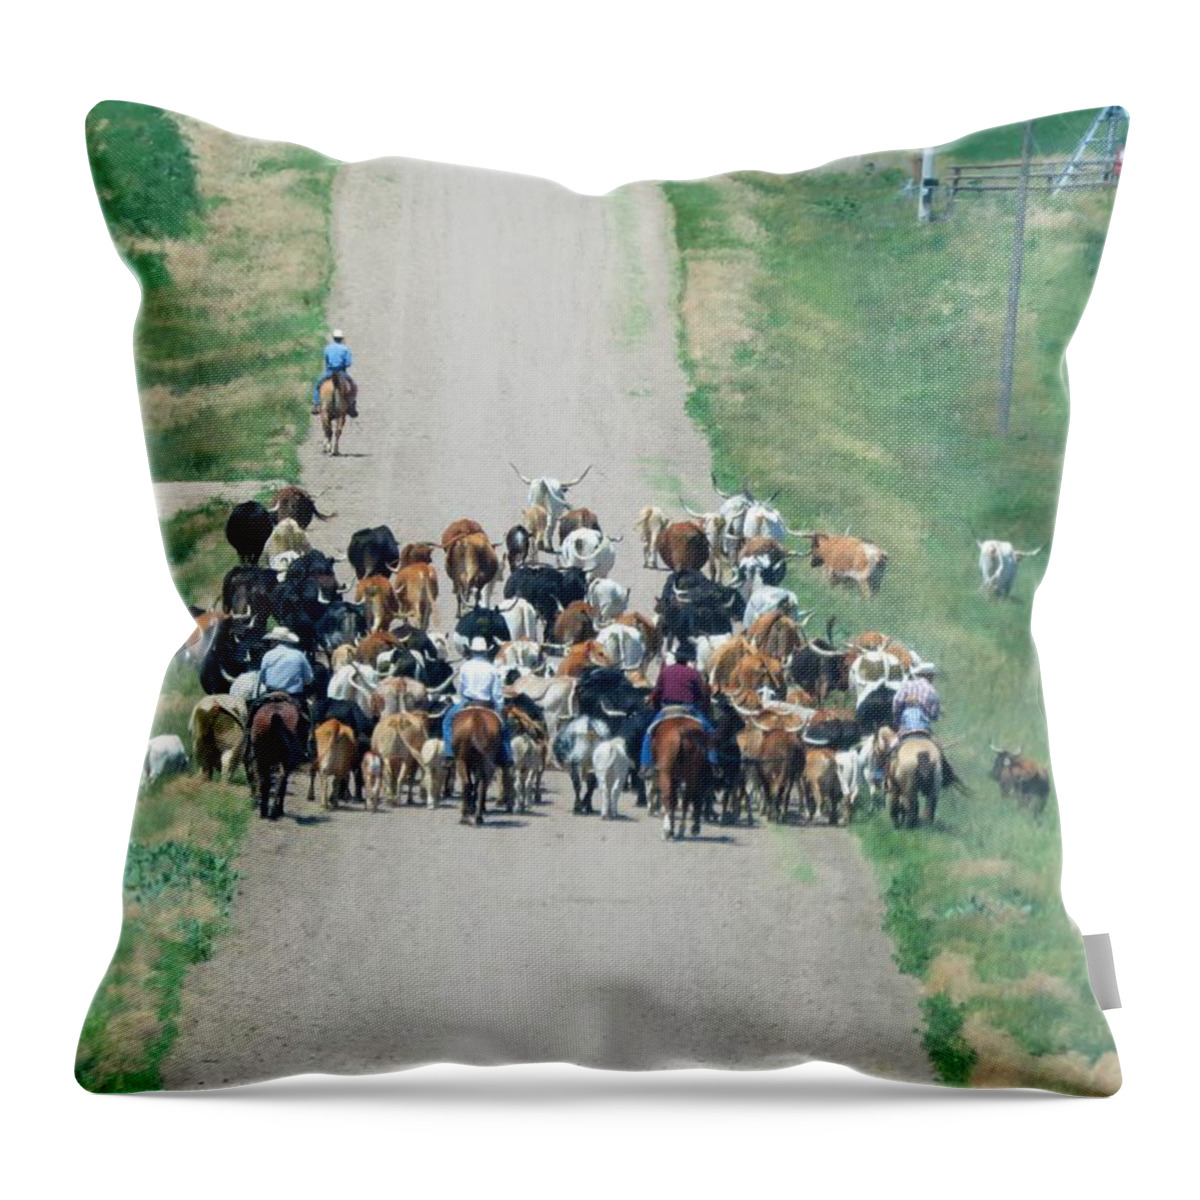 Cattle Drive Throw Pillow featuring the photograph Cattle Drive by Keith Stokes